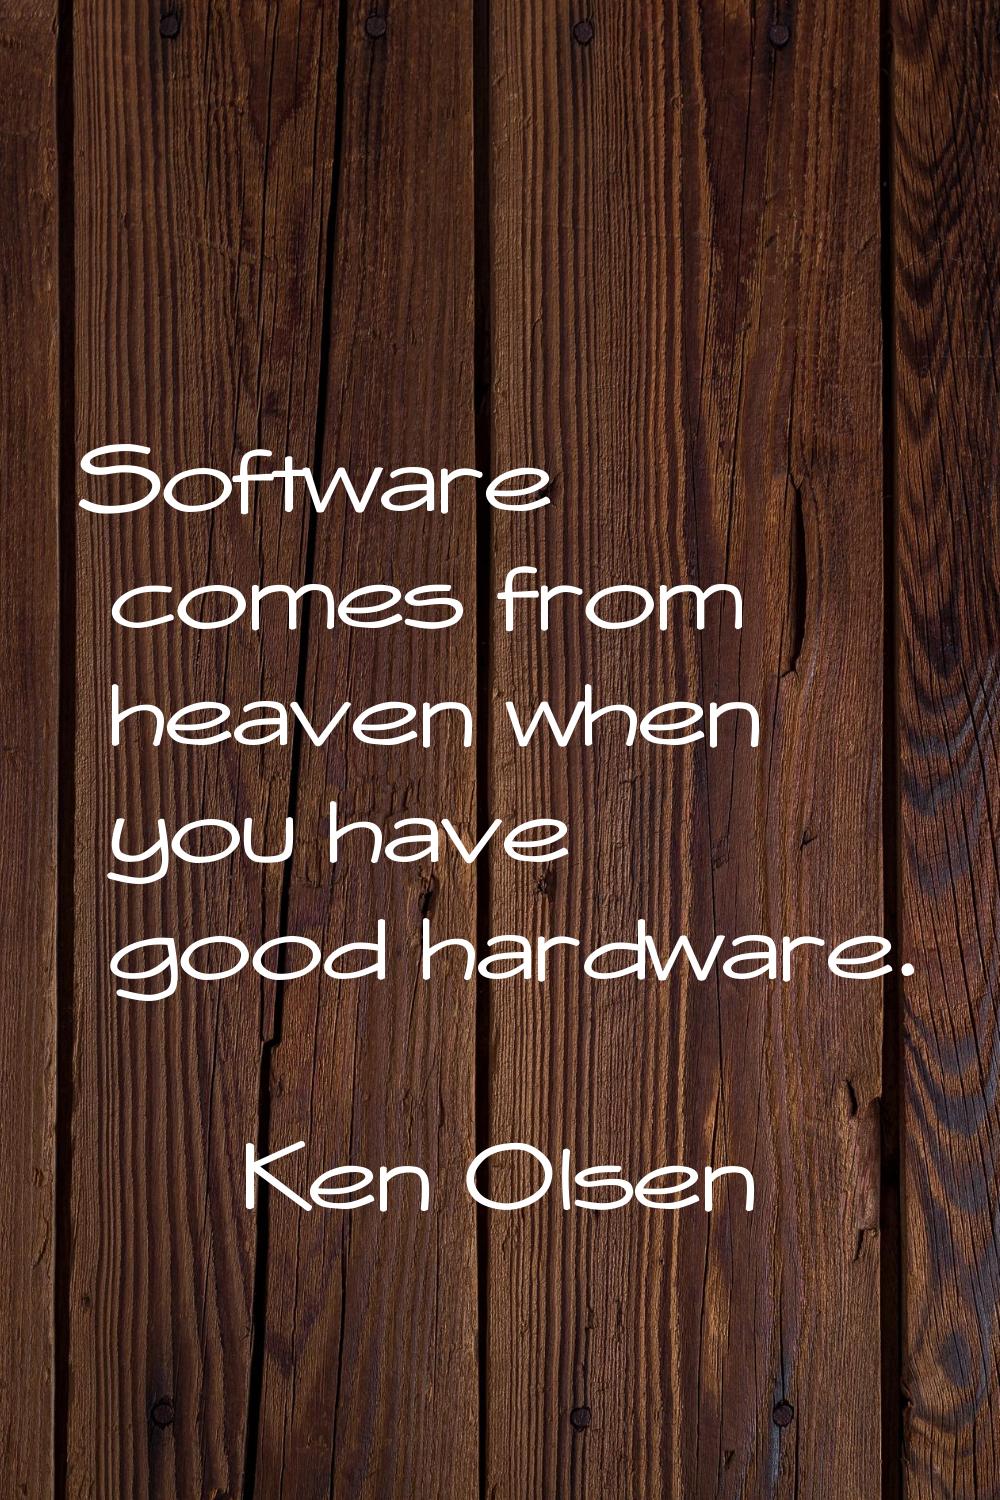 Software comes from heaven when you have good hardware.